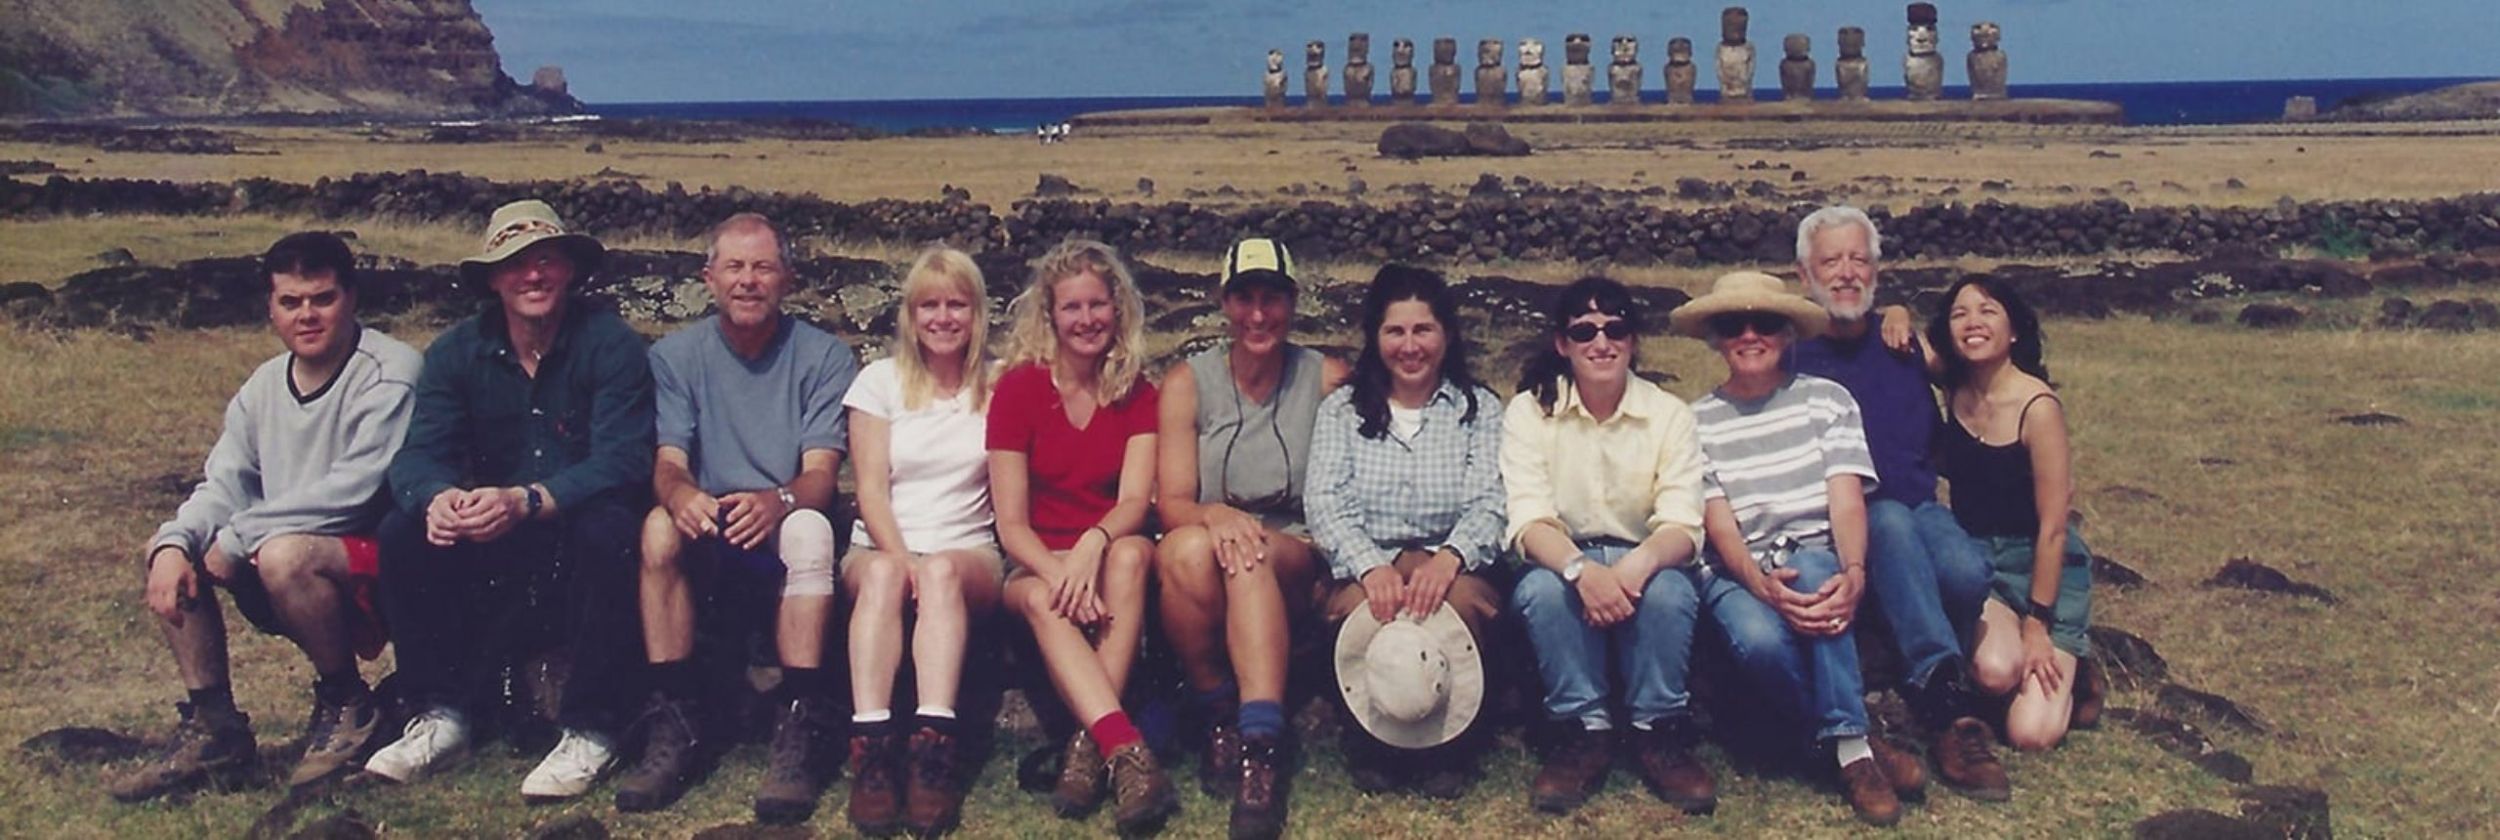 Earthwatchers reunite 20 years after Rapa Nui expedition hero